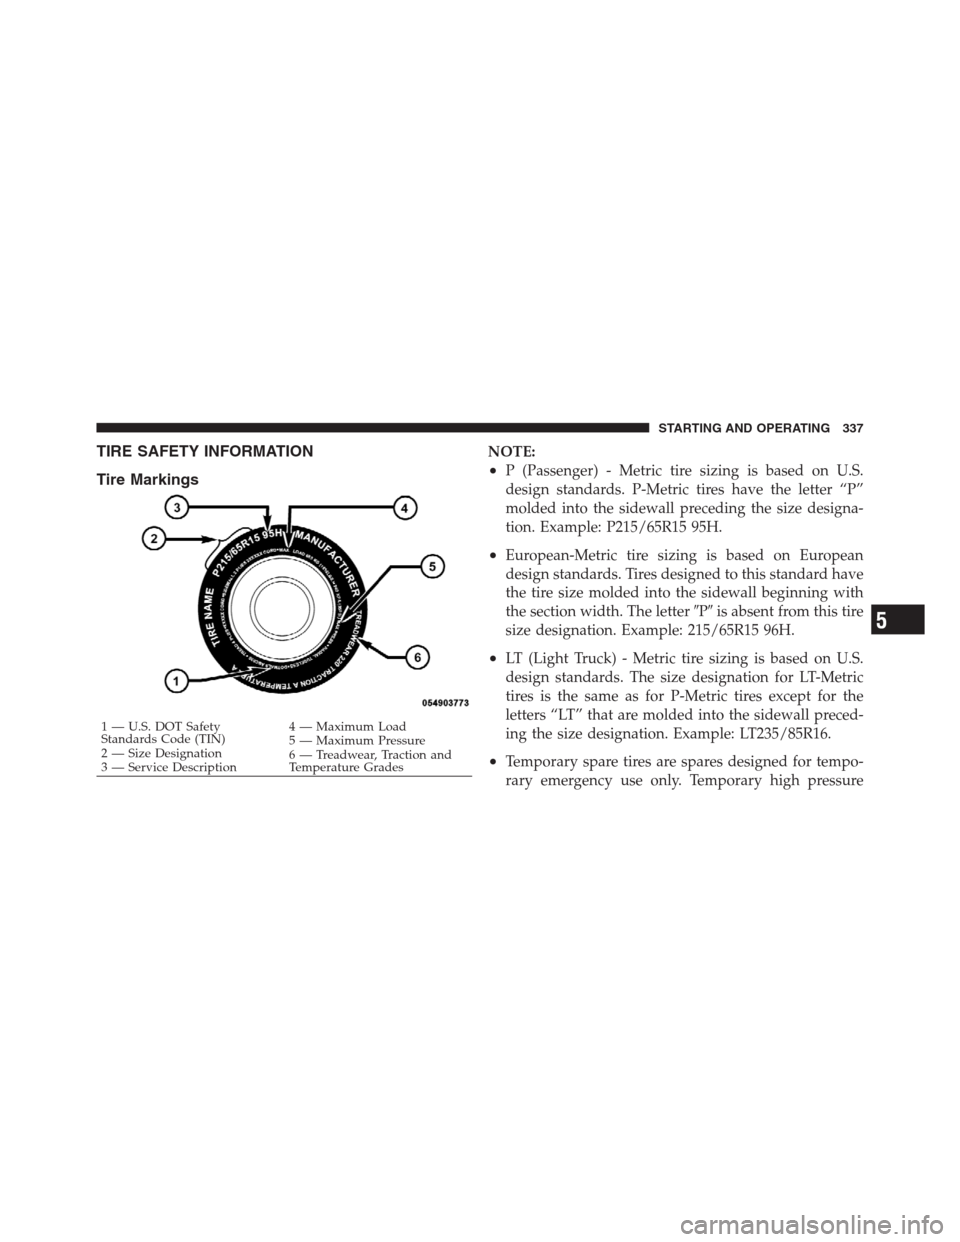 JEEP PATRIOT 2012 1.G User Guide TIRE SAFETY INFORMATION
Tire MarkingsNOTE:
•P (Passenger) - Metric tire sizing is based on U.S.
design standards. P-Metric tires have the letter “P”
molded into the sidewall preceding the size d